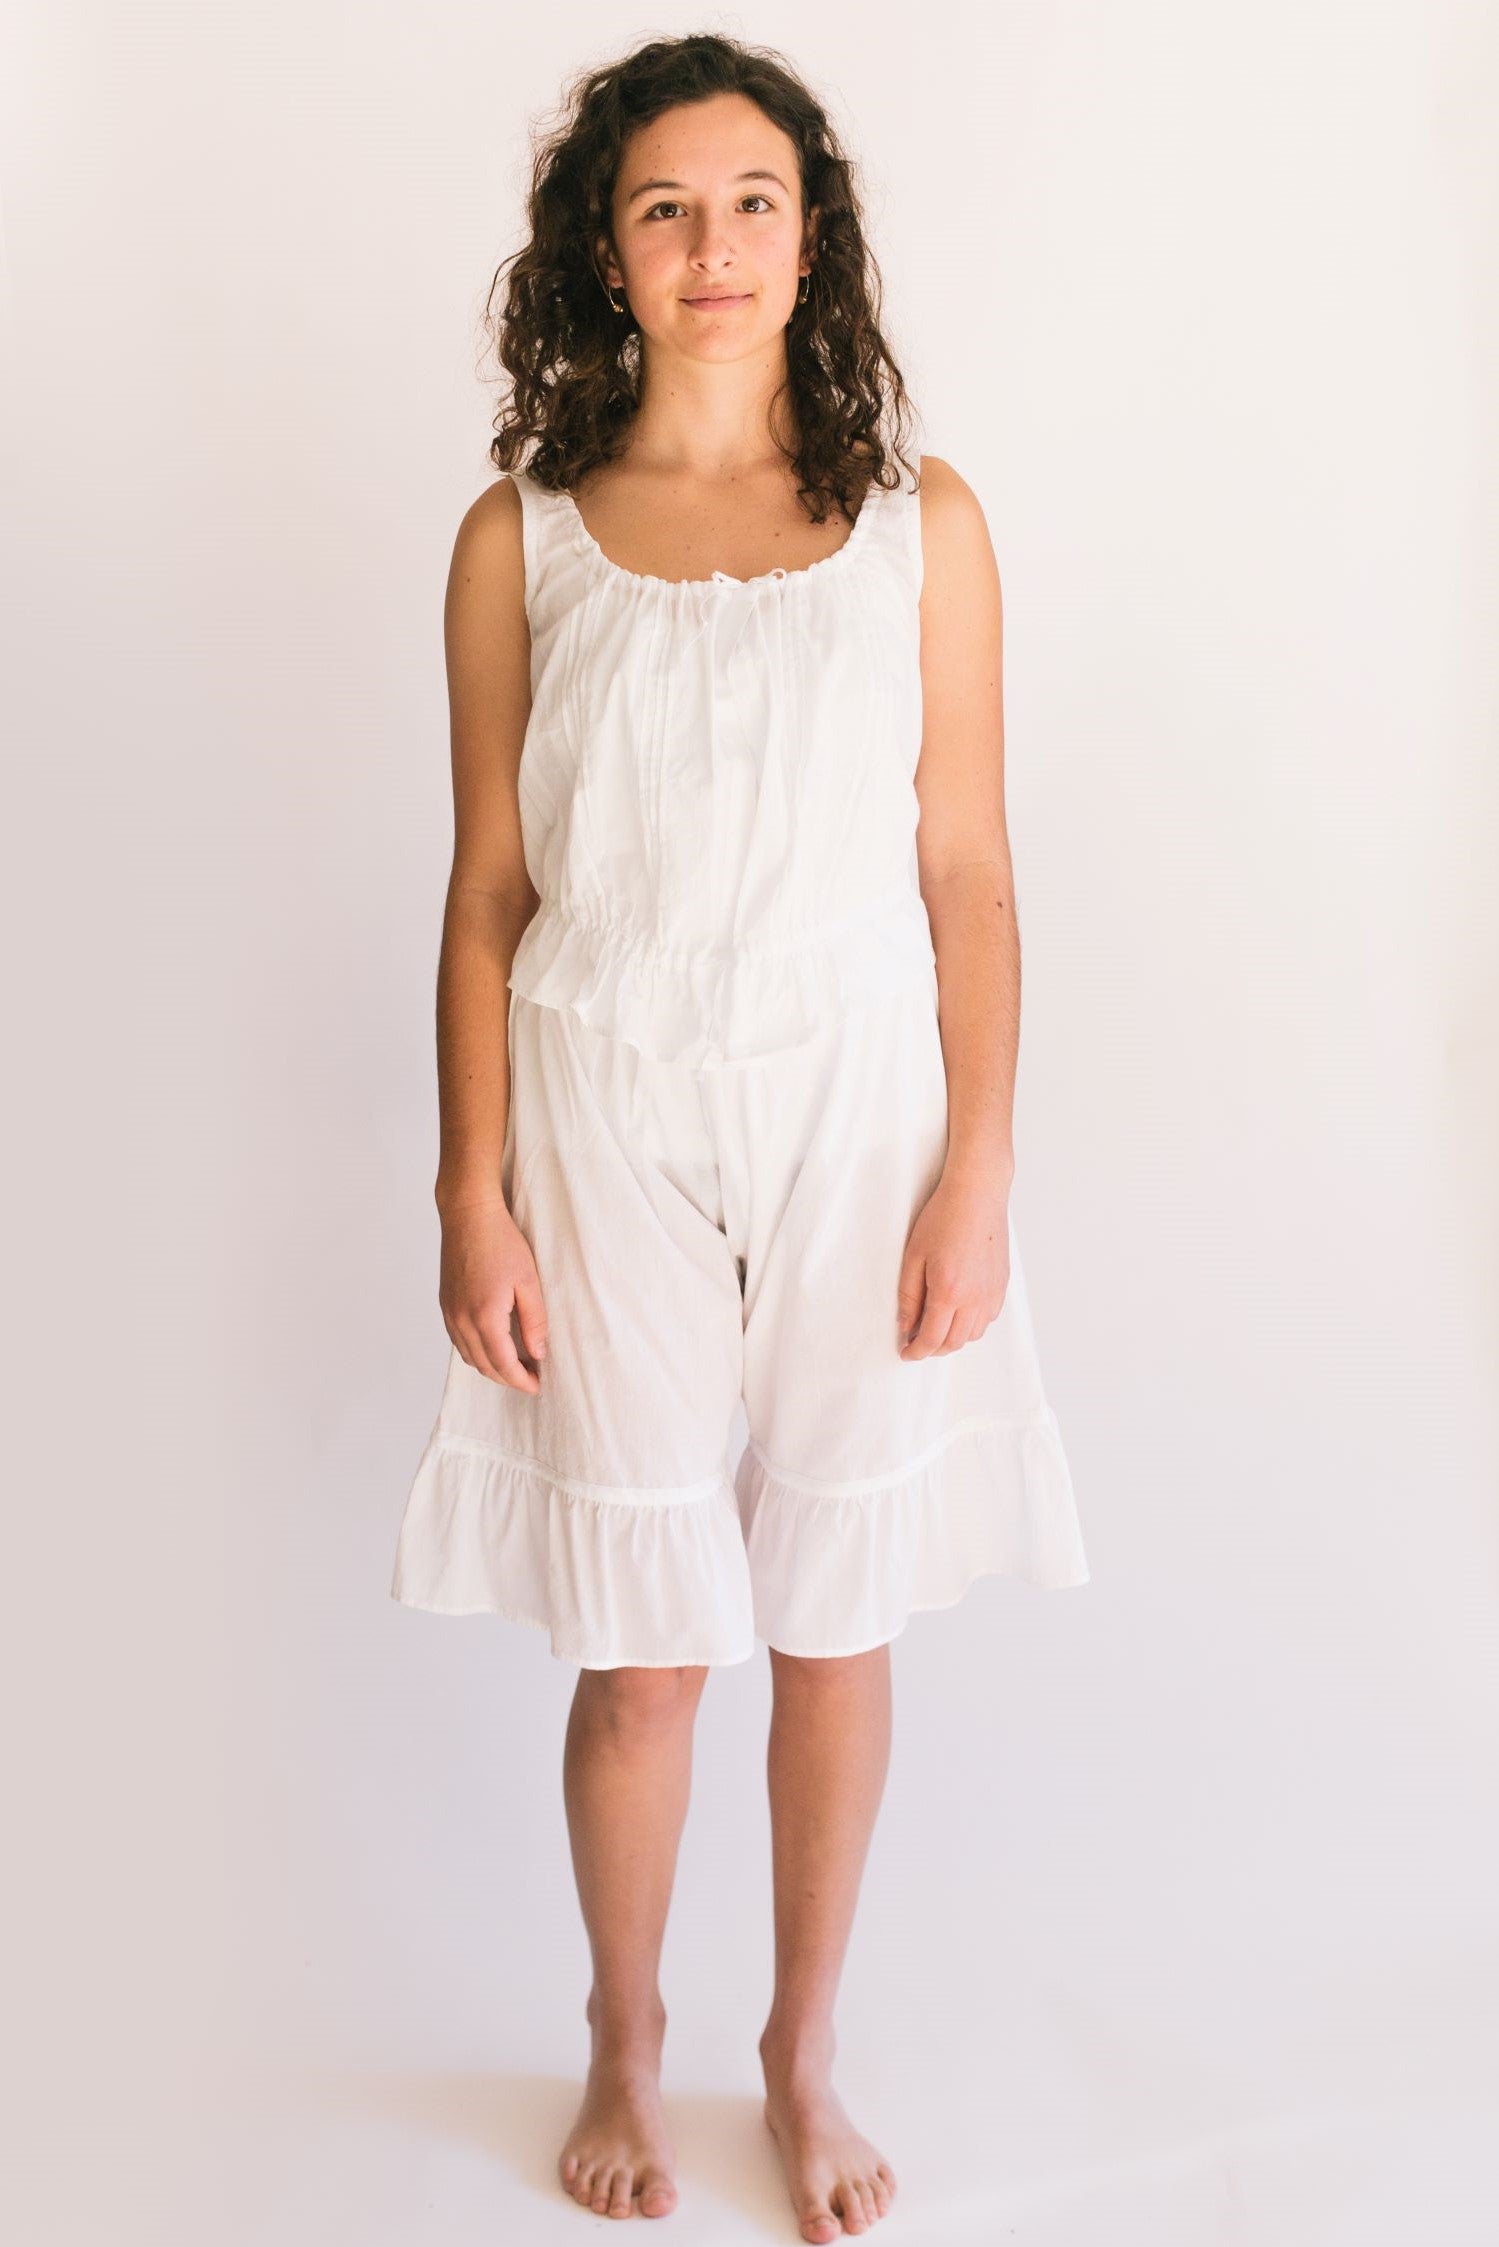 Photo of young woman standing in front of a white studio backdrop wearing camisole and drawers.